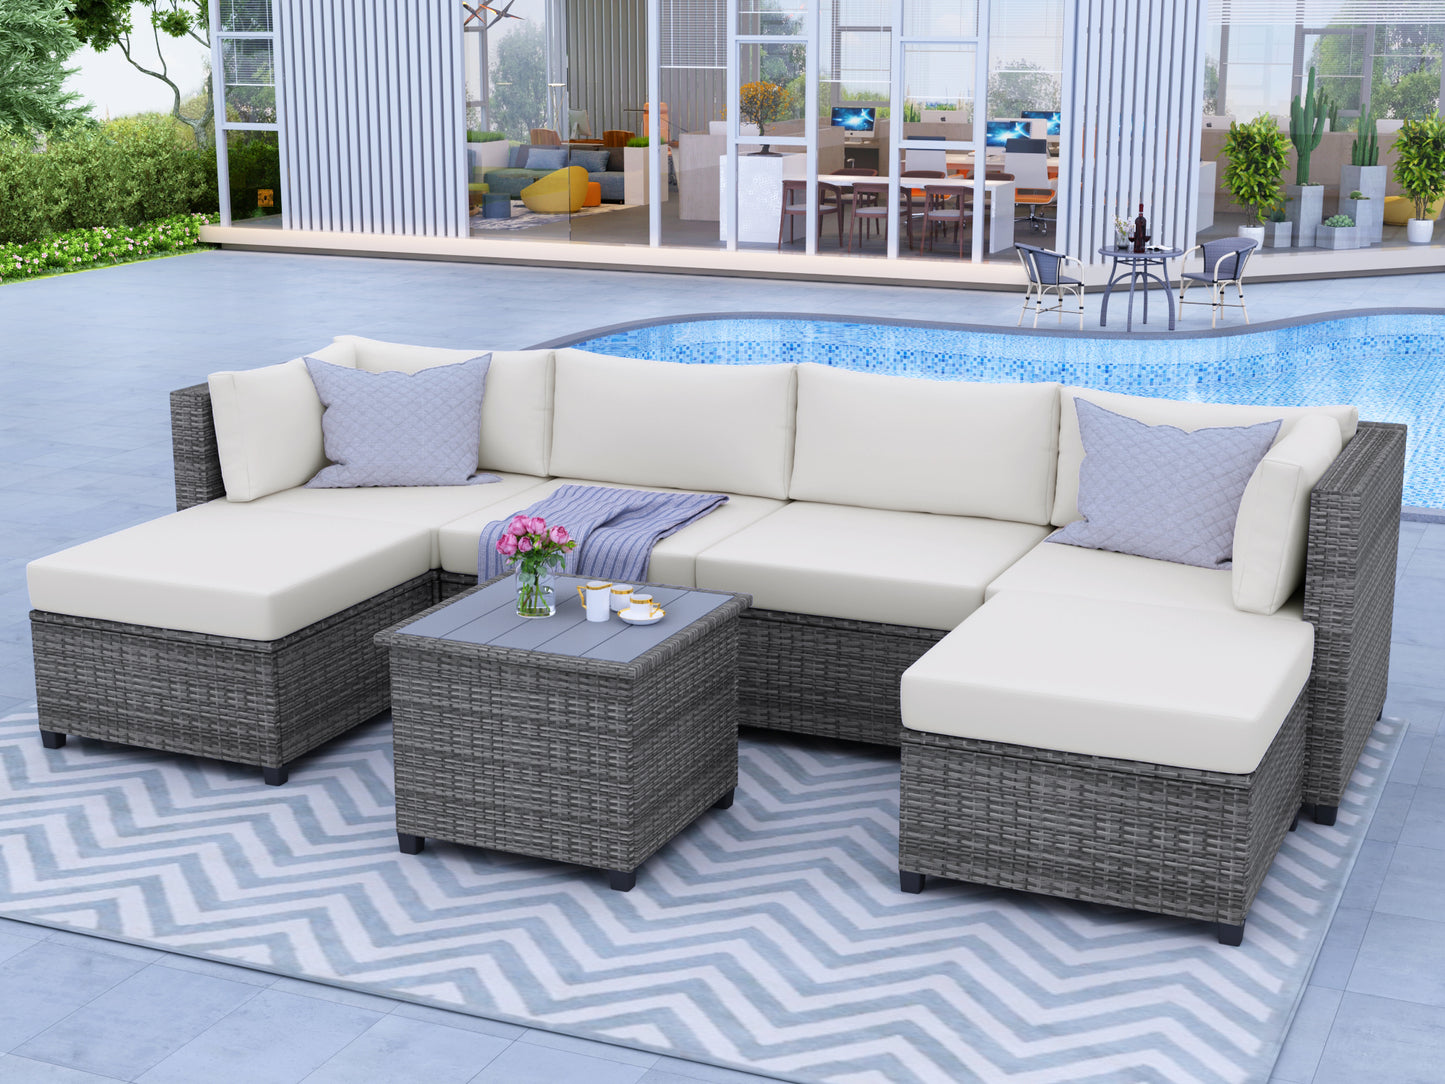 U_Style 7 Piece Rattan Sectional Seating Group with Cushions, Outdoor Ratten Sofa NEW!